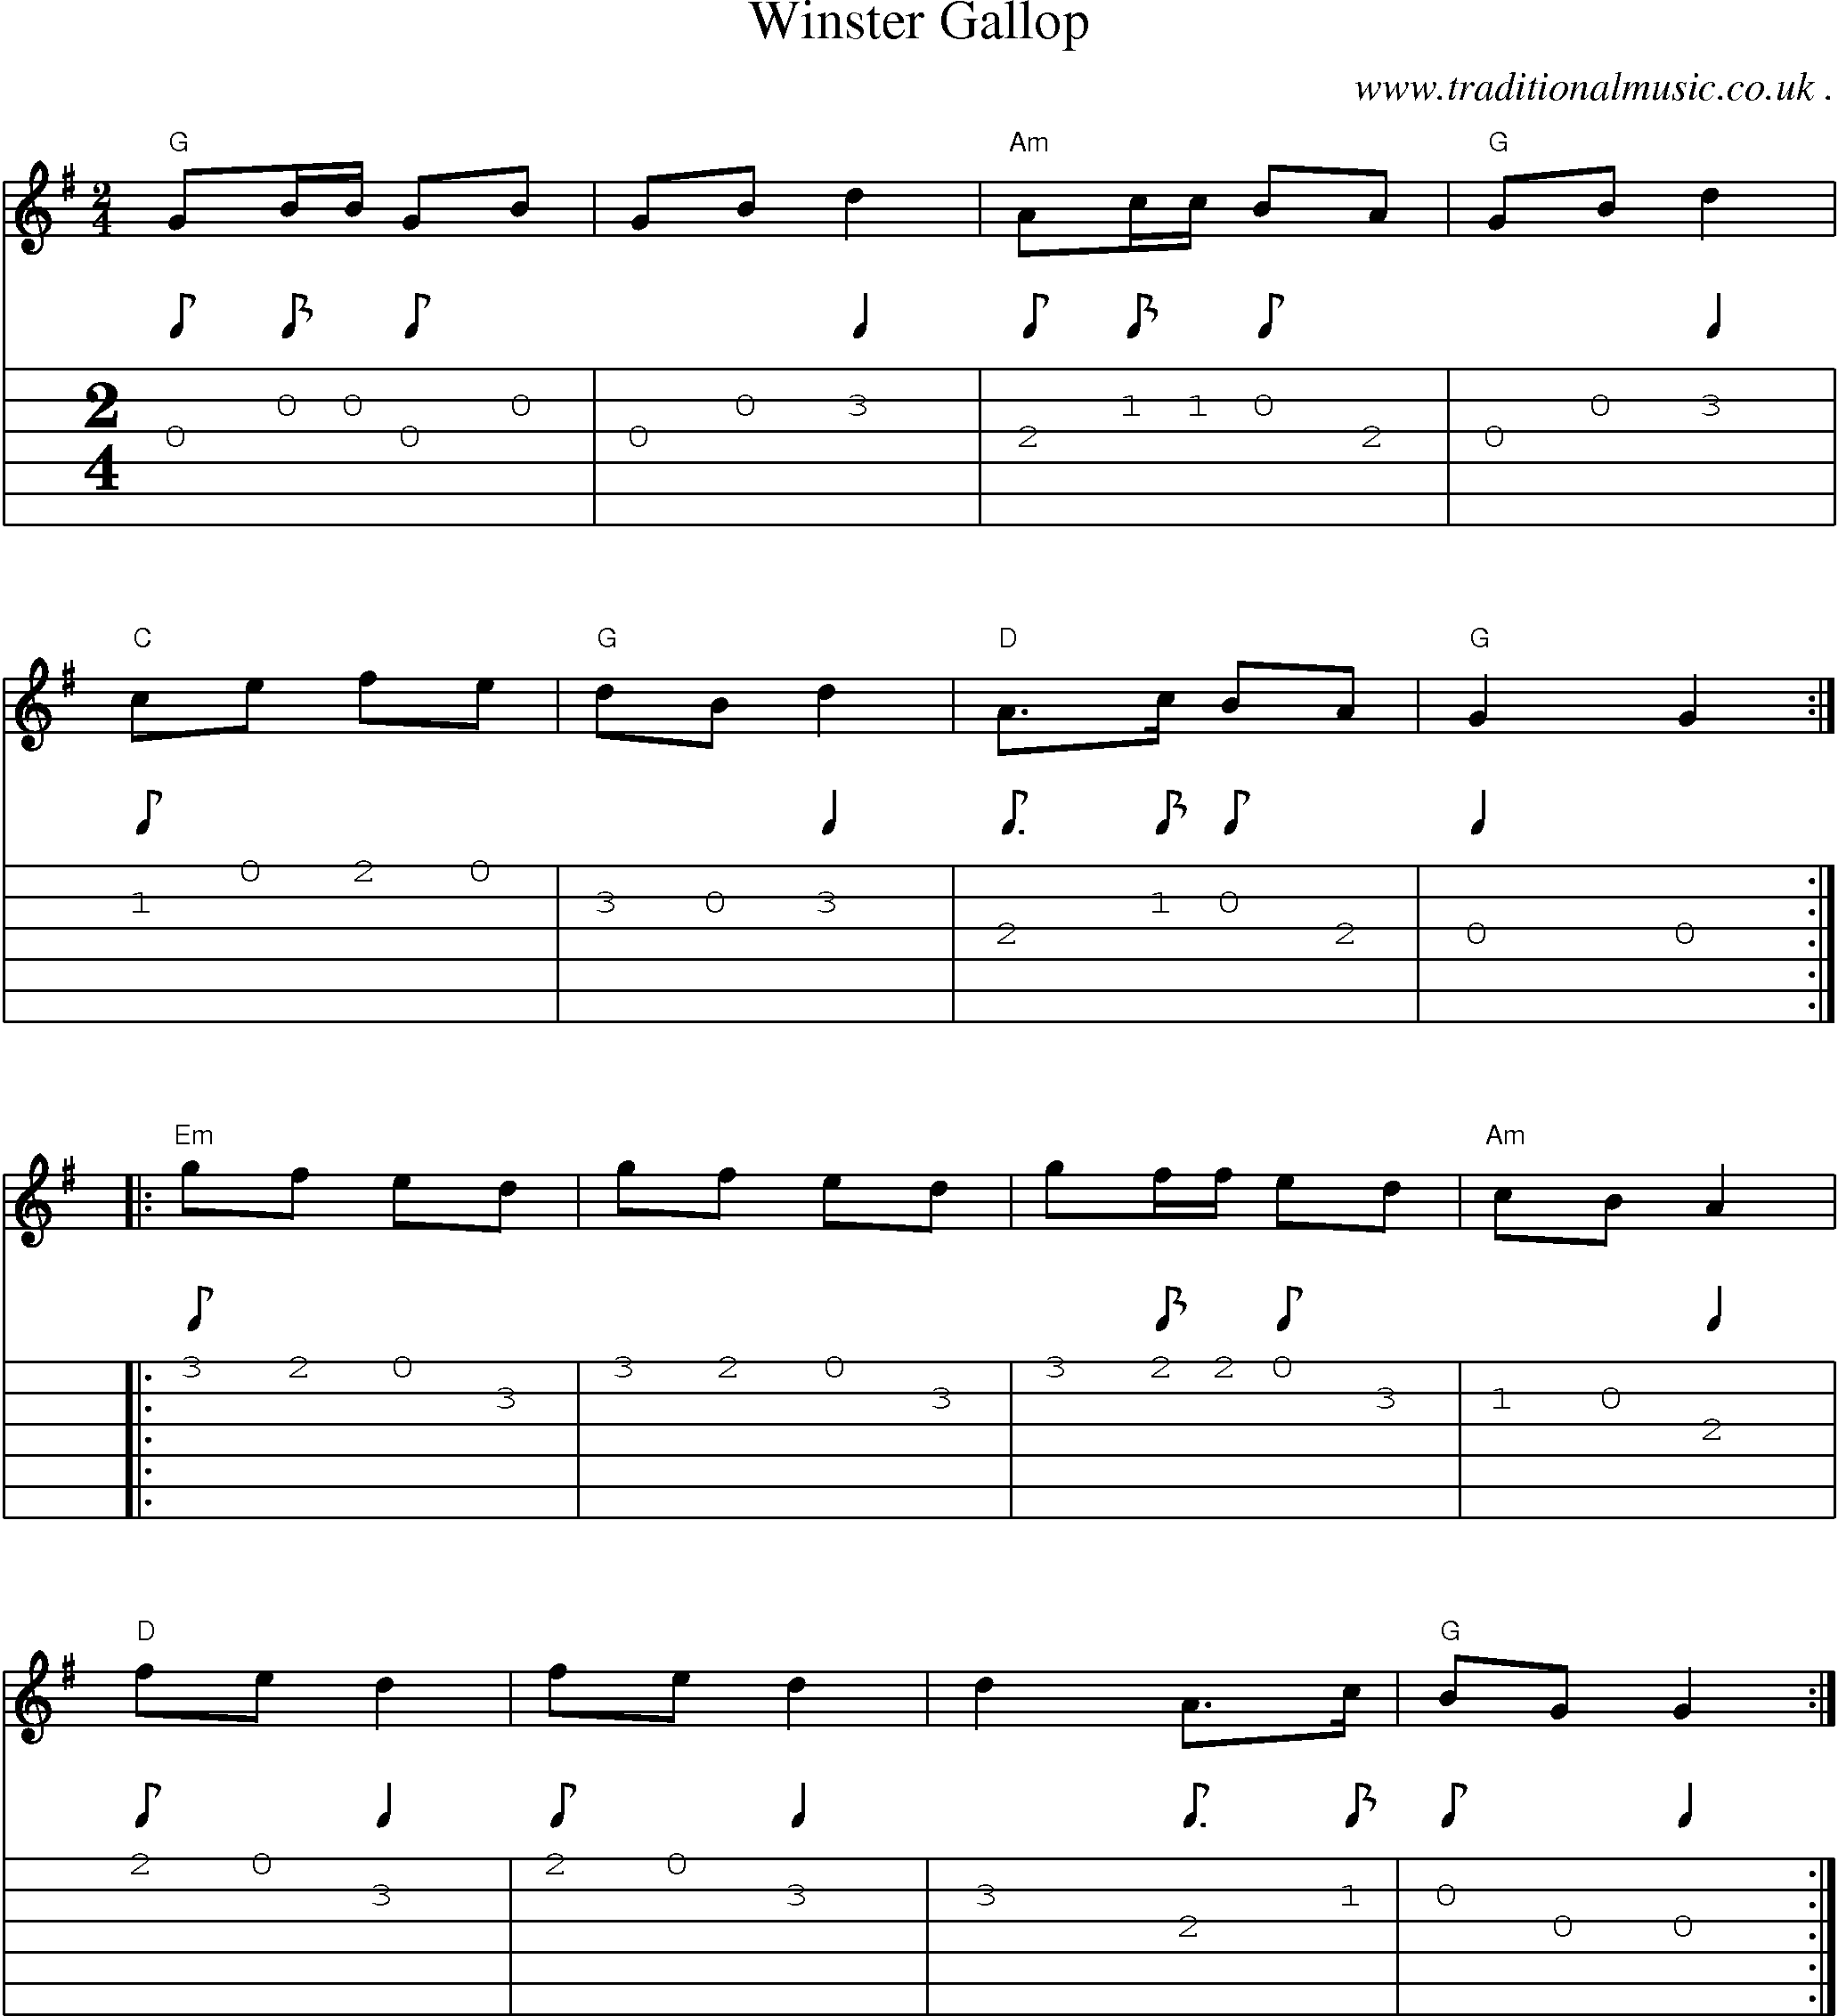 Music Score and Guitar Tabs for Winster Gallop